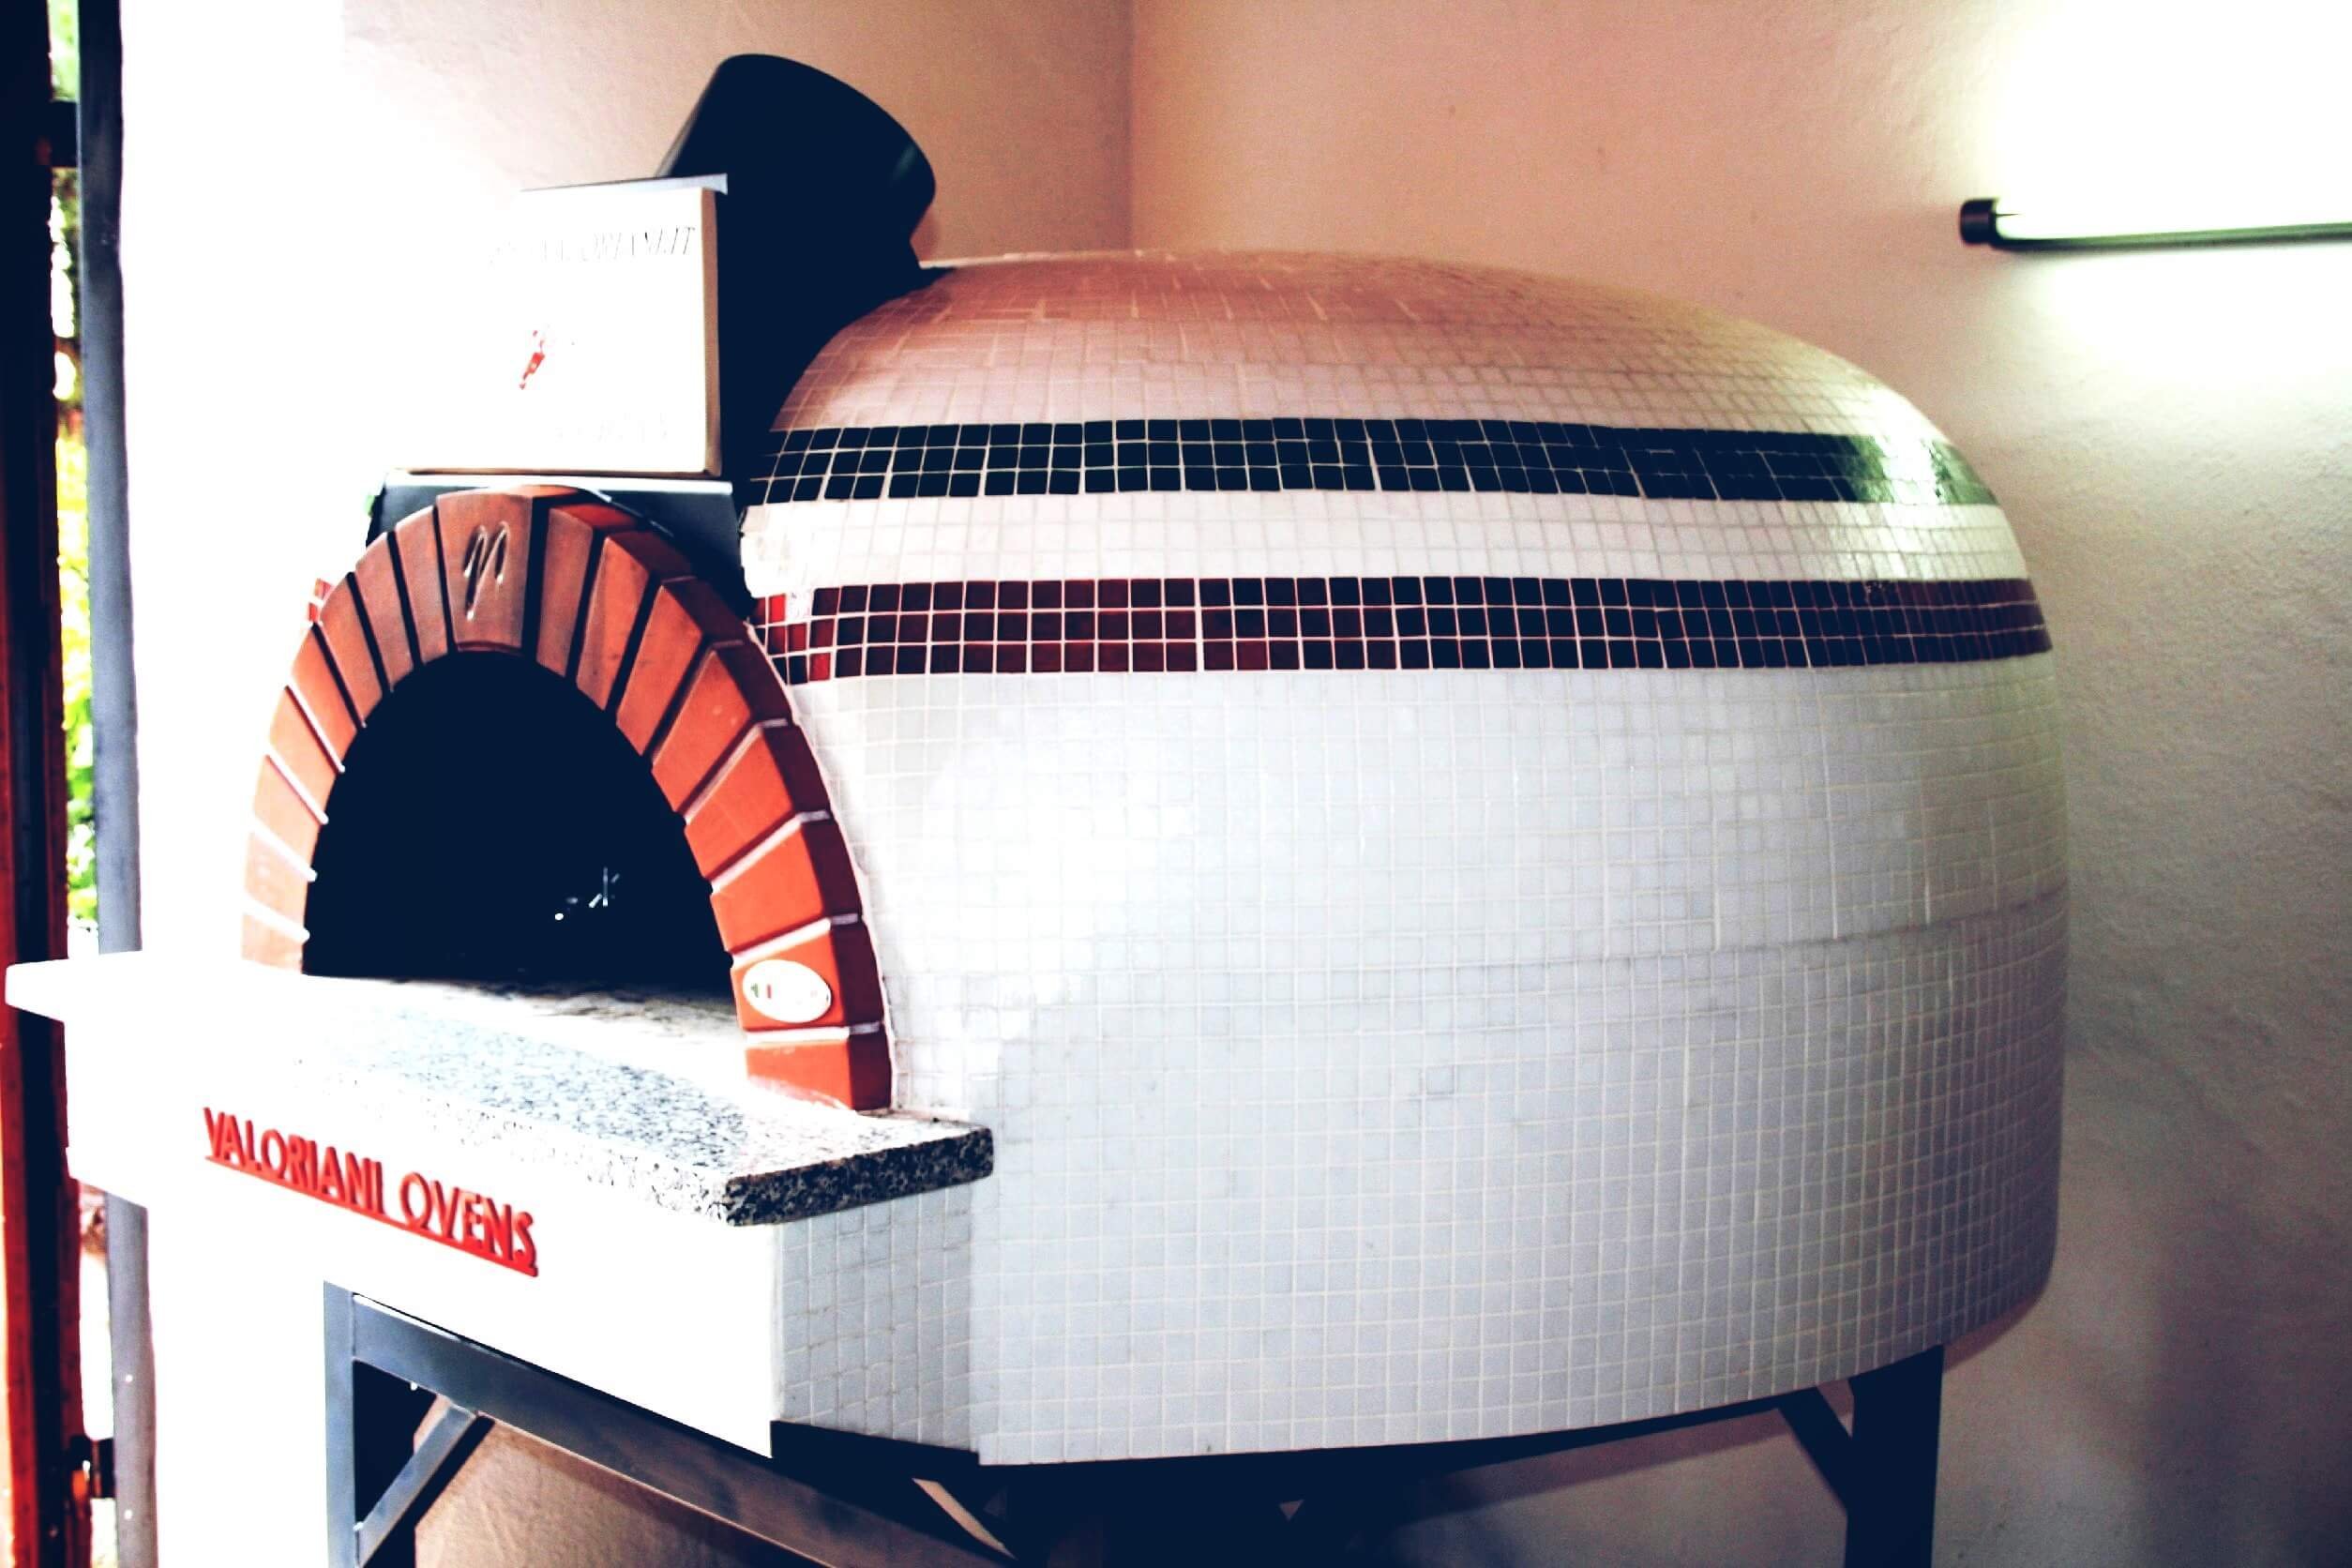 Professional pizza and baking oven, wood firing for continuous firing, Valoriani Vesuvio GR, 120x160cm